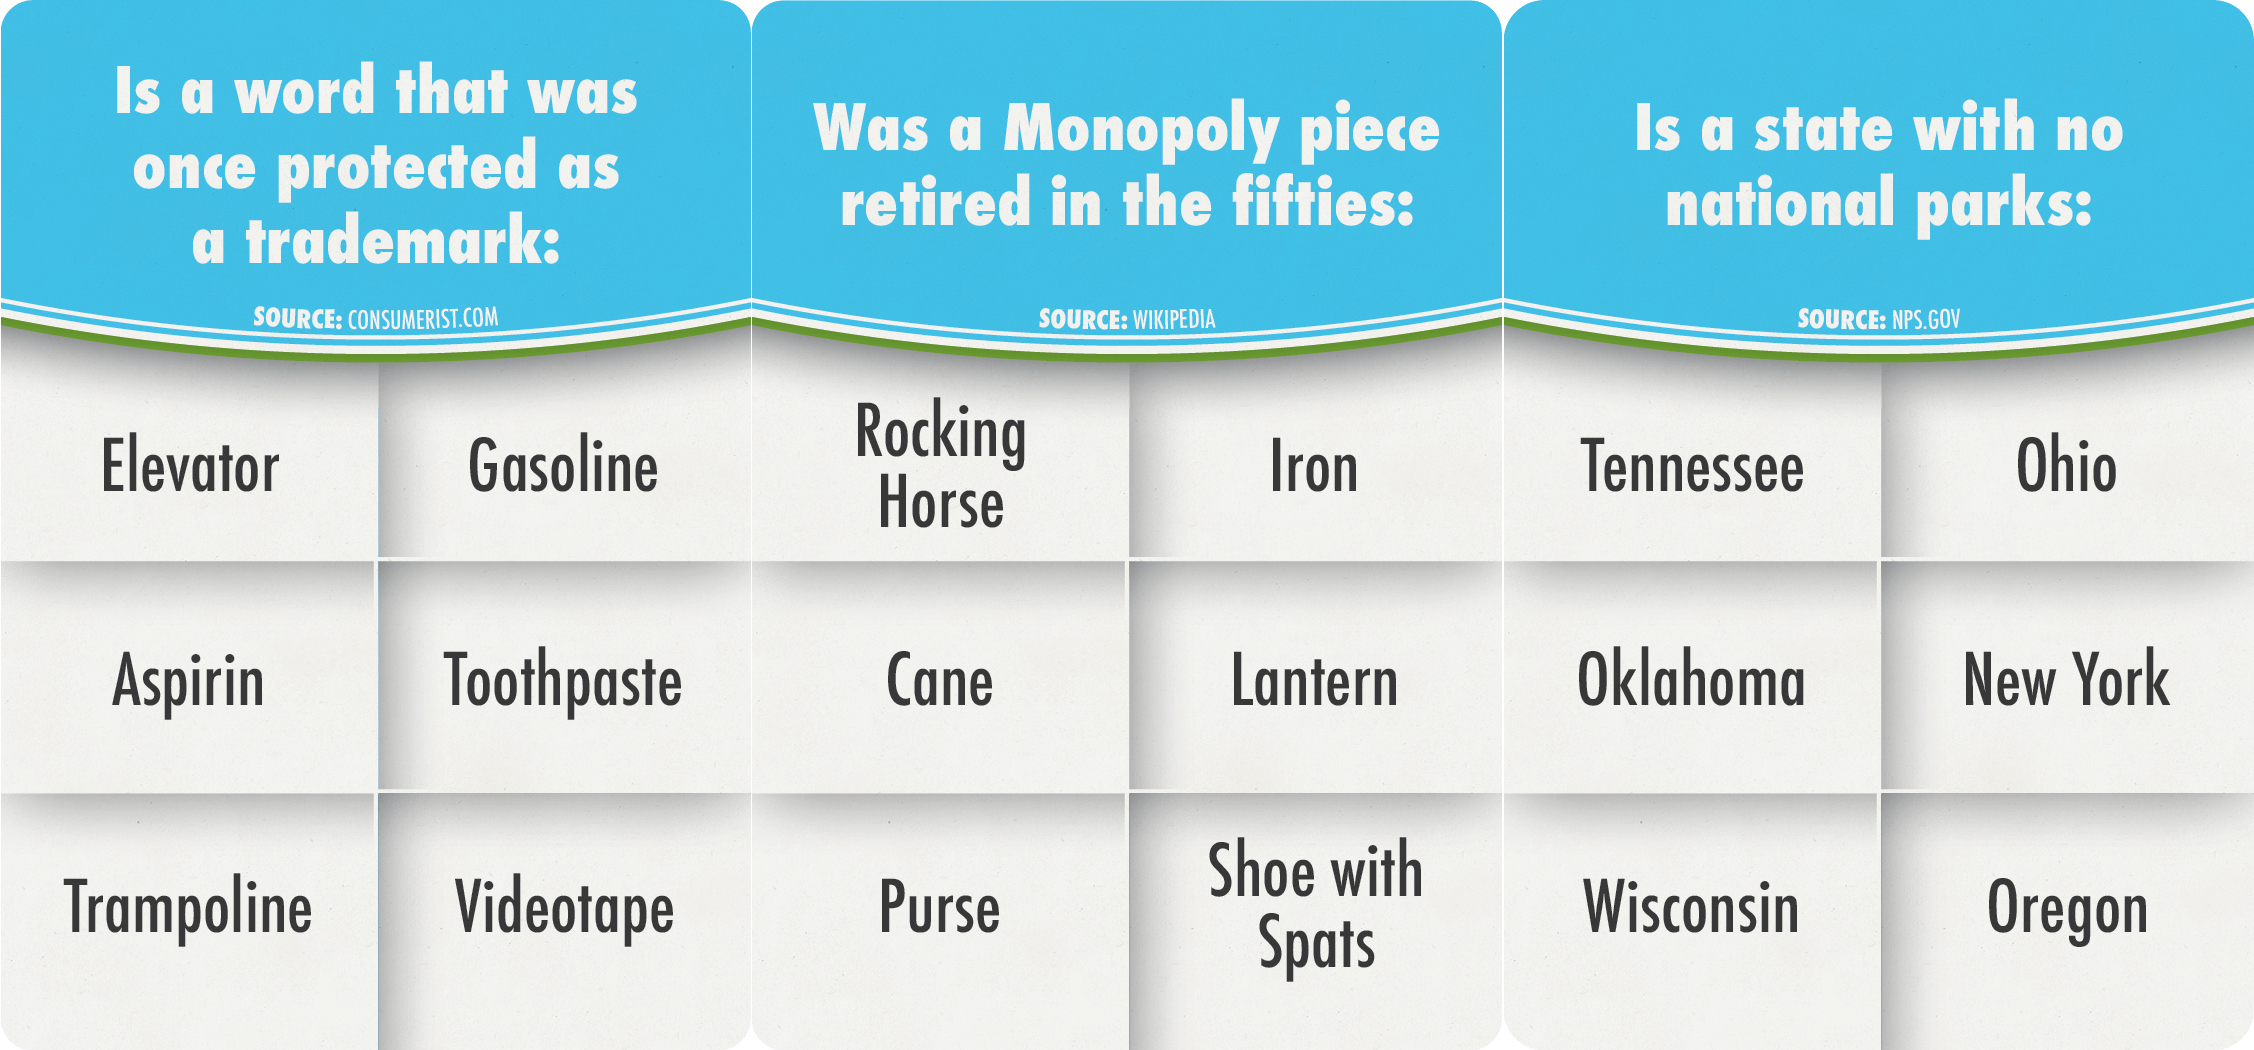 3 example cards arranged horizontally. from left to right, First card: Is a word that was once protected as a trademark (Source consumerist.com). Answer options: elevator, gasoline, aspirin, toothpaste, trampoline, videotape. Second card: Was a Monopoly piece retired in the fifties (Source: wikipedia.com). Answer options: rocking horse, iron, cane, lantern, purse, shoe with spats. Third card: Is a state with no national parks (Source: nps.gov). Answer options: Tennesee, Ohio, Oklahoma, New York, Wisconsin, 